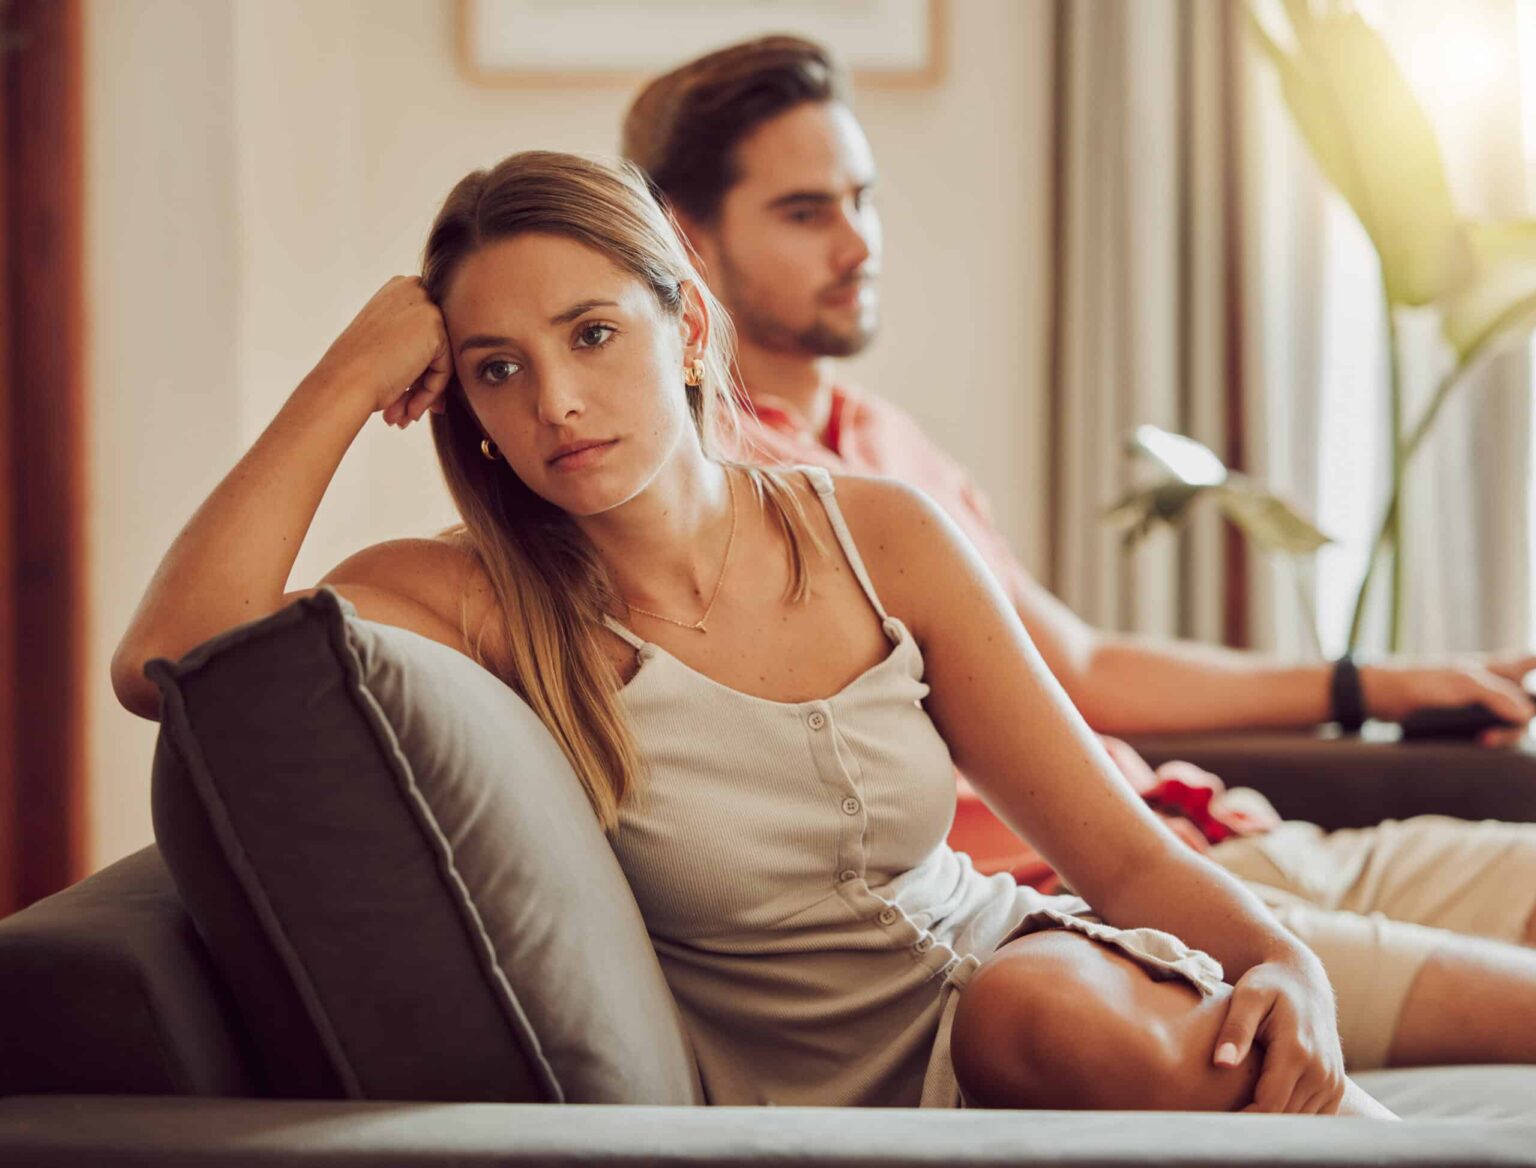 6 Ways We Unintentionally Belittle Our Spouses